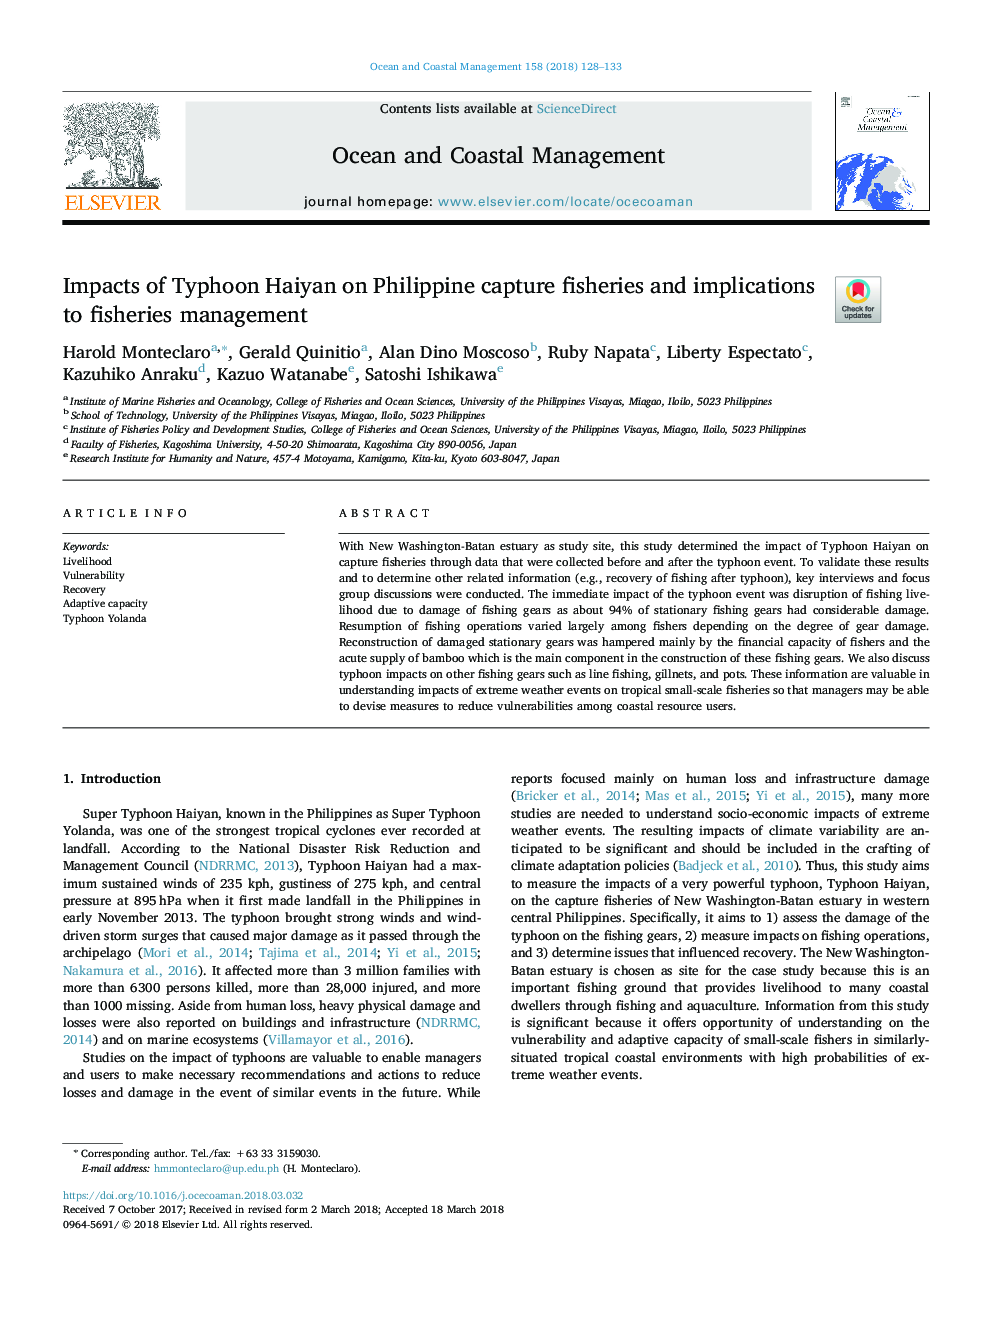 Impacts of Typhoon Haiyan on Philippine capture fisheries and implications to fisheries management